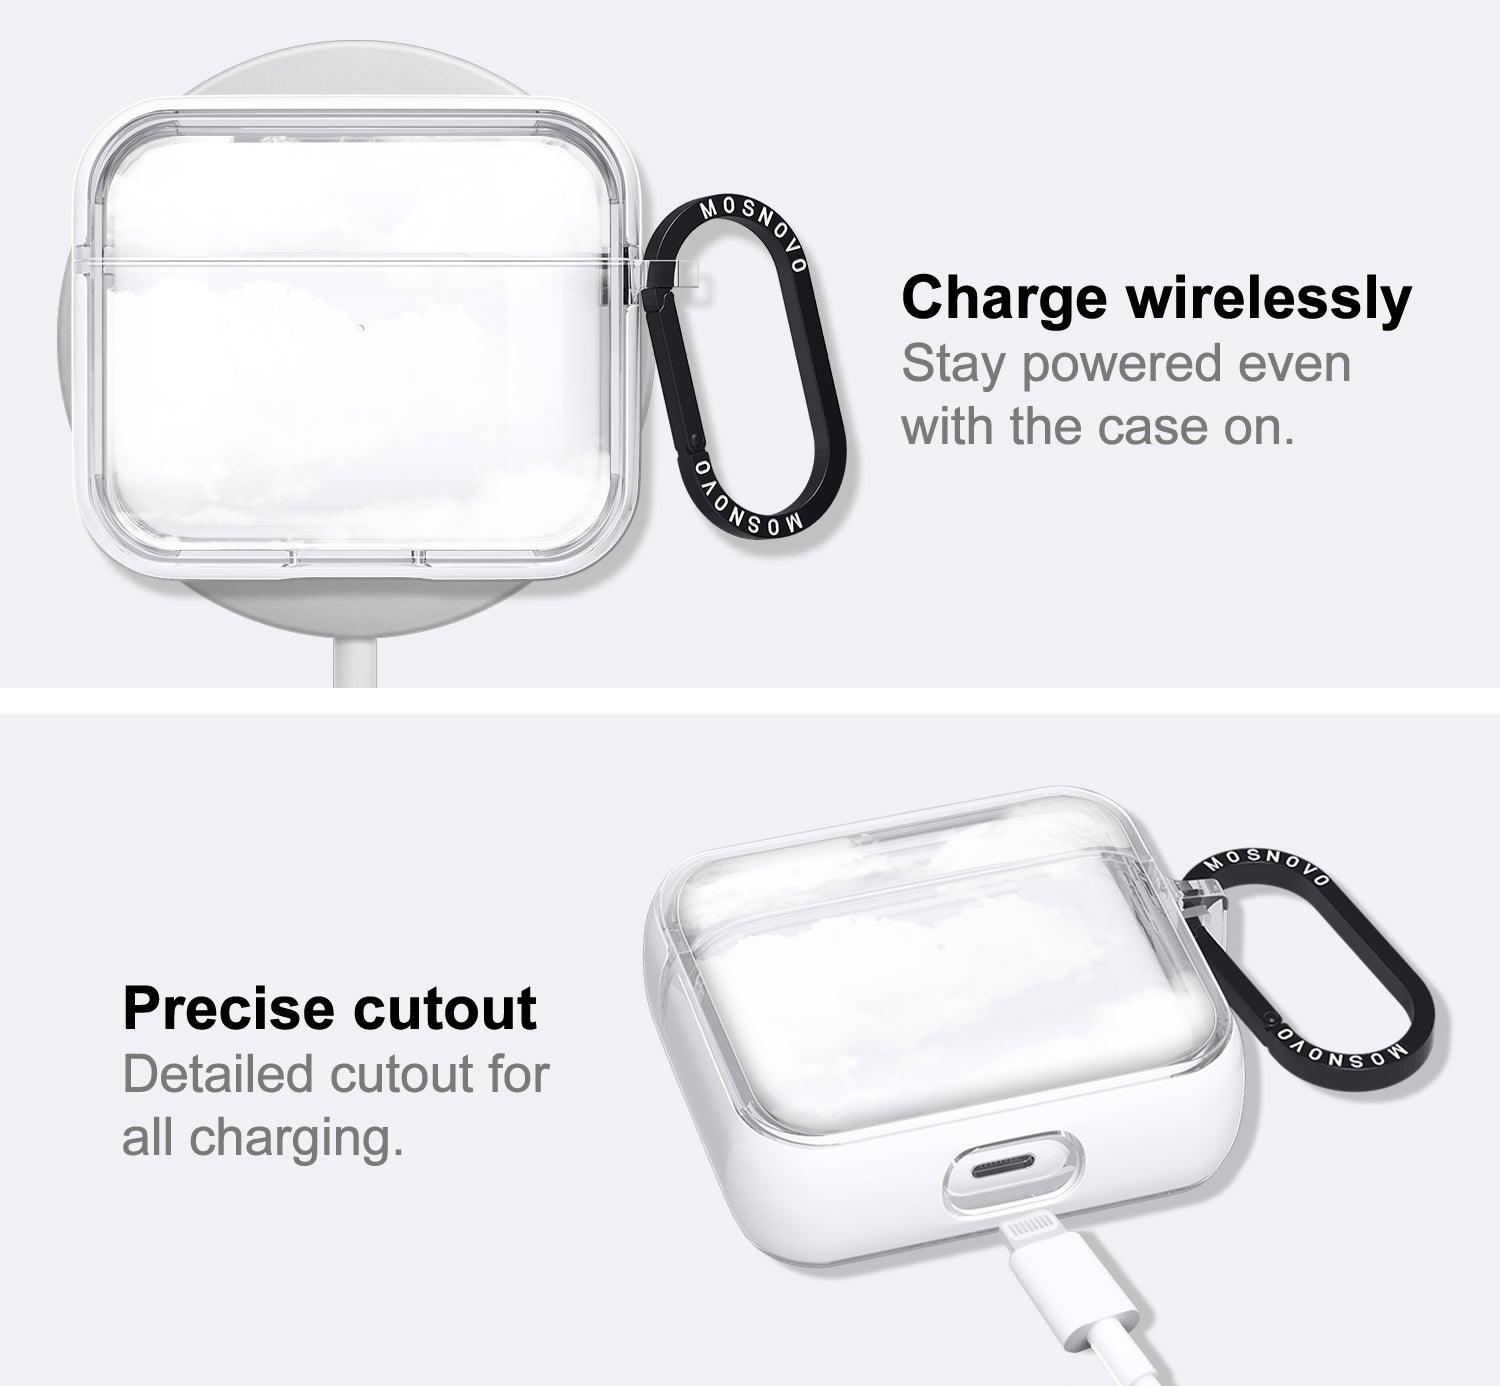 Cloud AirPods 3 Case (3rd Generation) - MOSNOVO